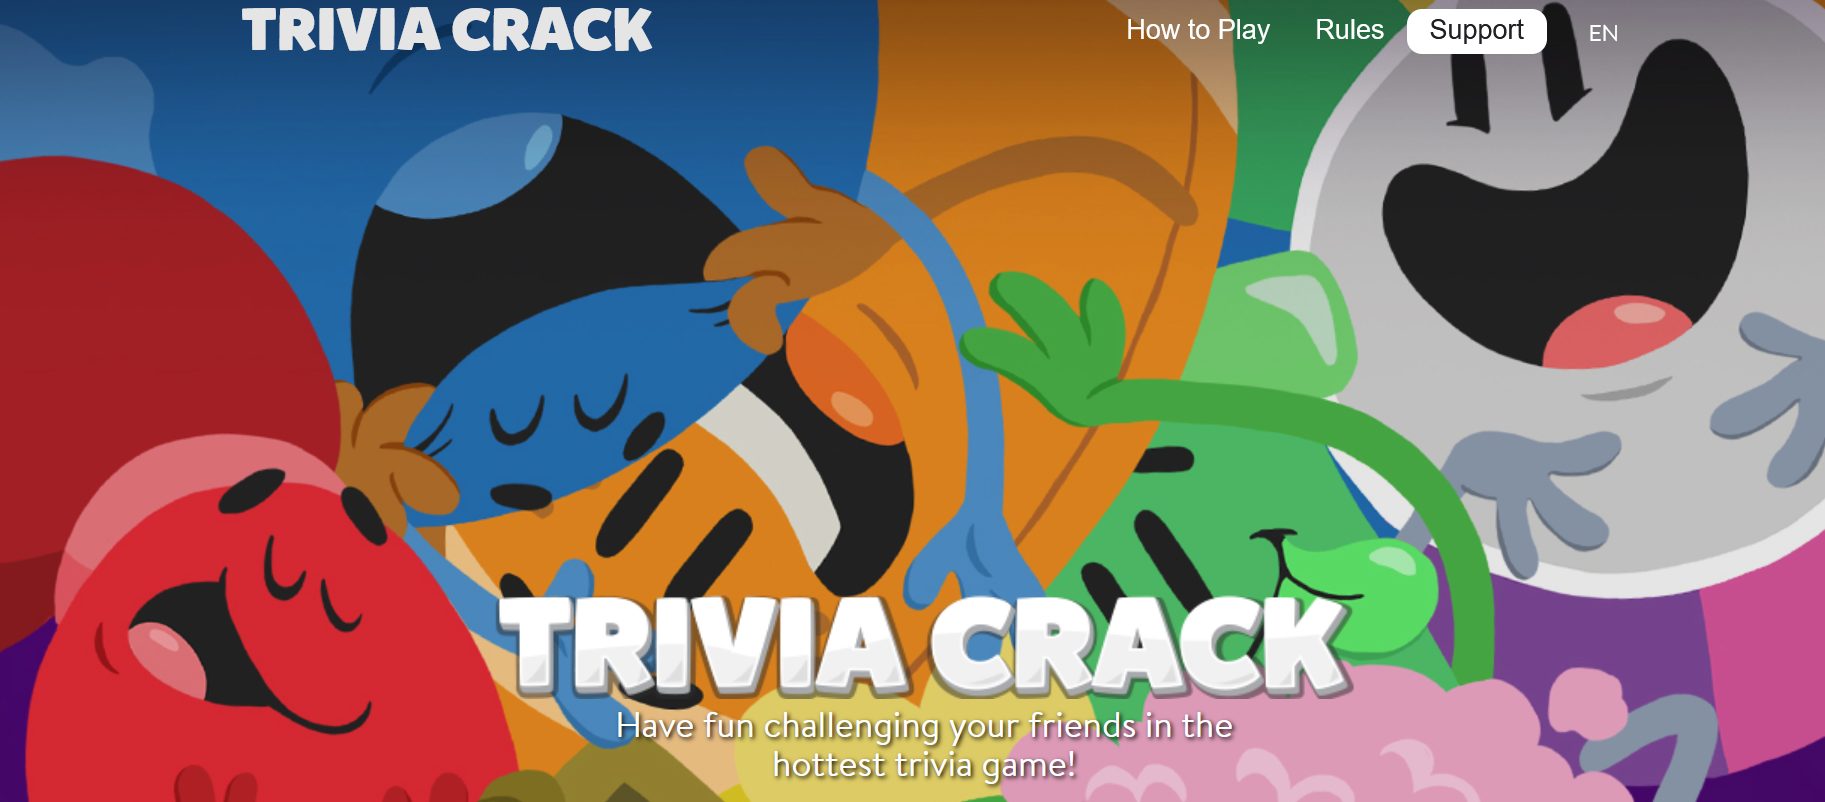 15 Best Online Trivia Games To Play With Friends Techywhale